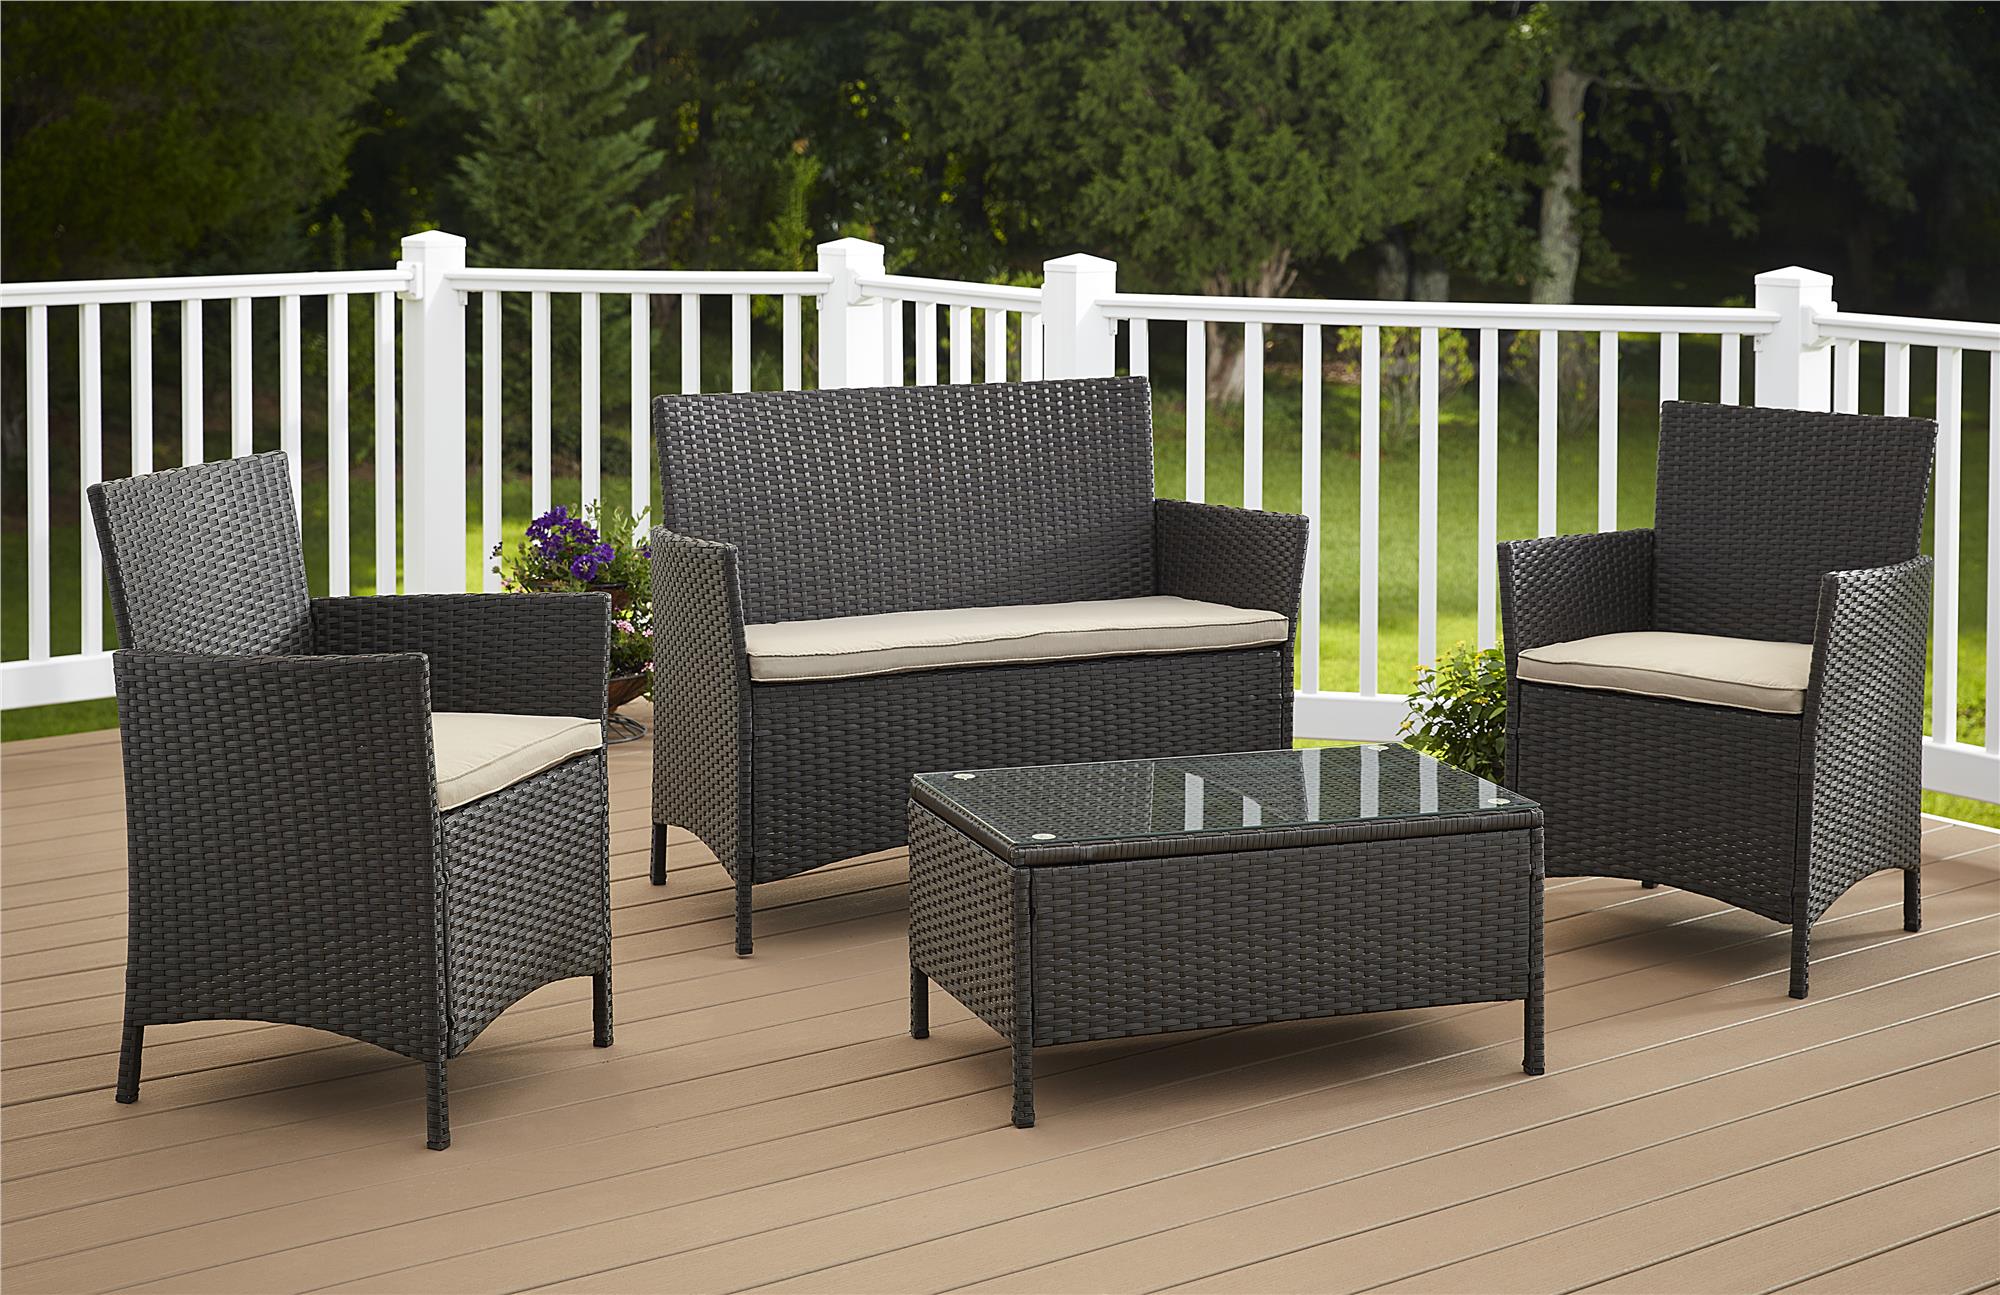 Cosco Home and Office Products Jamaica 4pc Resin Wicker Patio Seating Set Multiple Colors